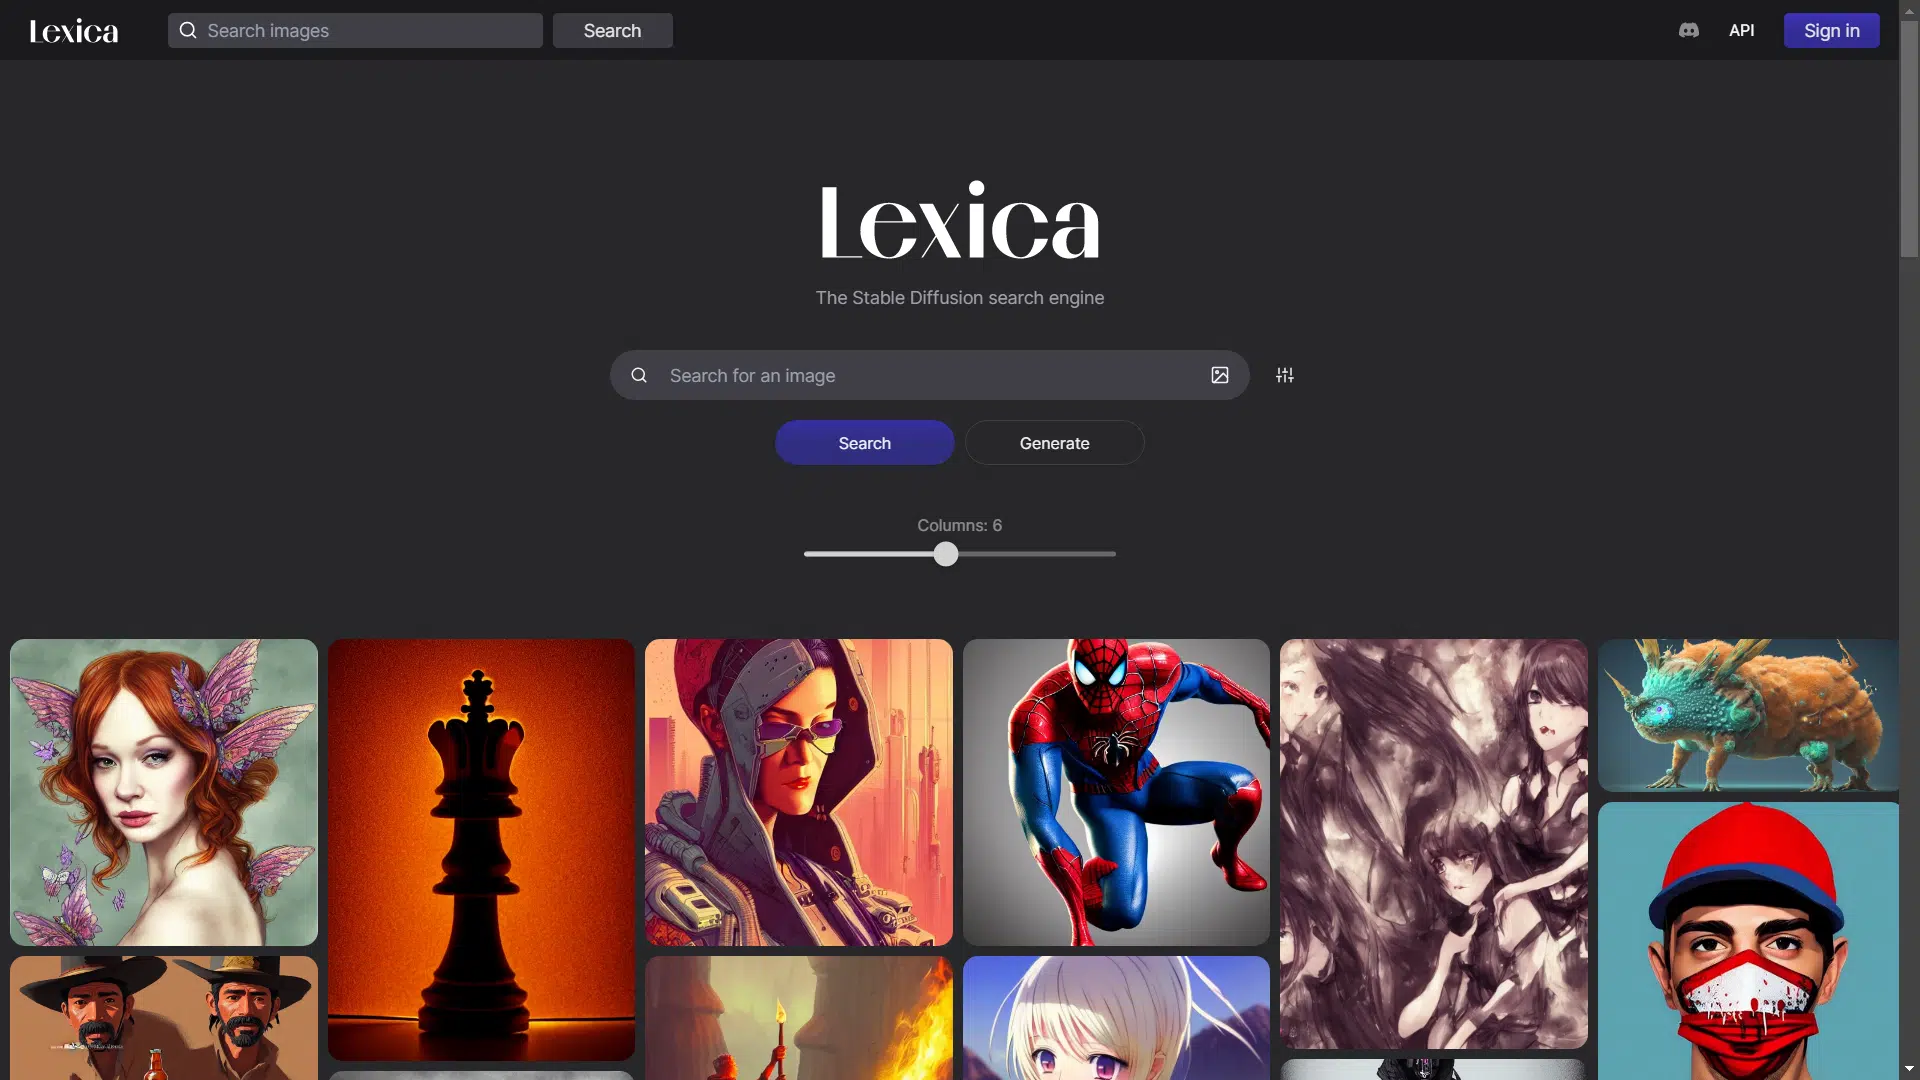 Lexicawebsite picture